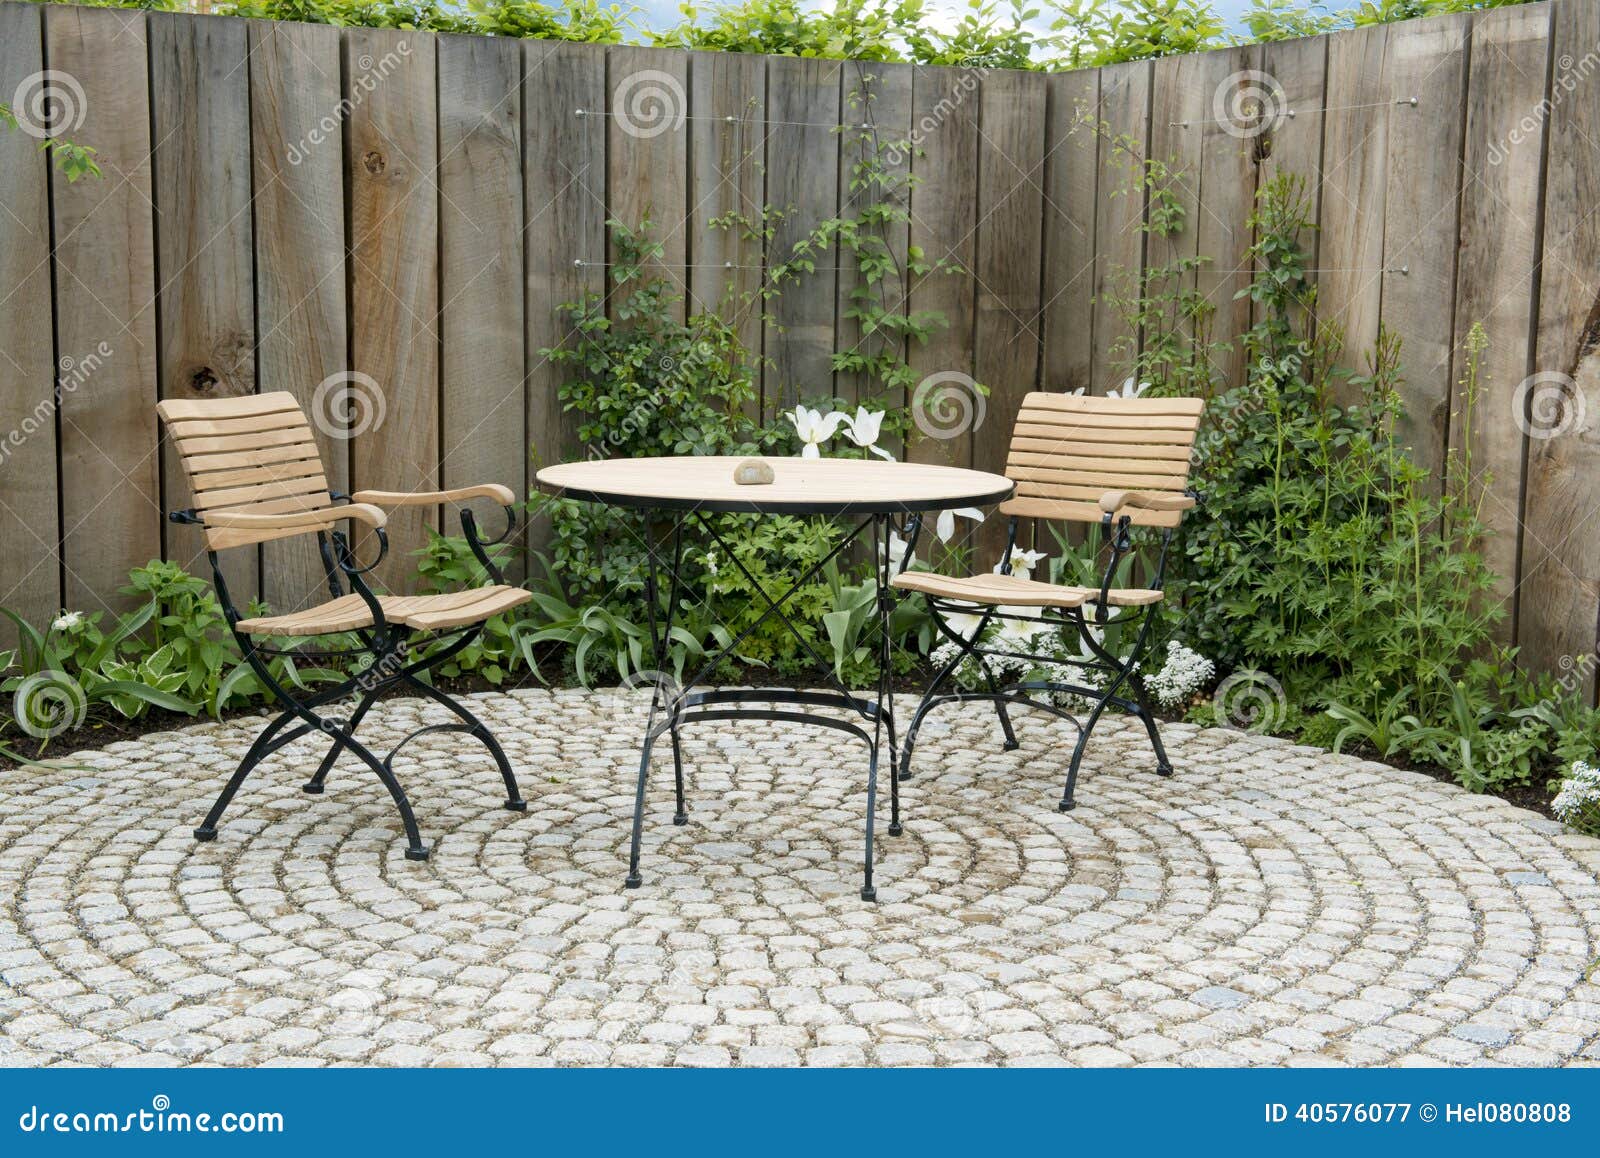 garden patio with round table and two chairs. outdoor furniture made of iron and wood material